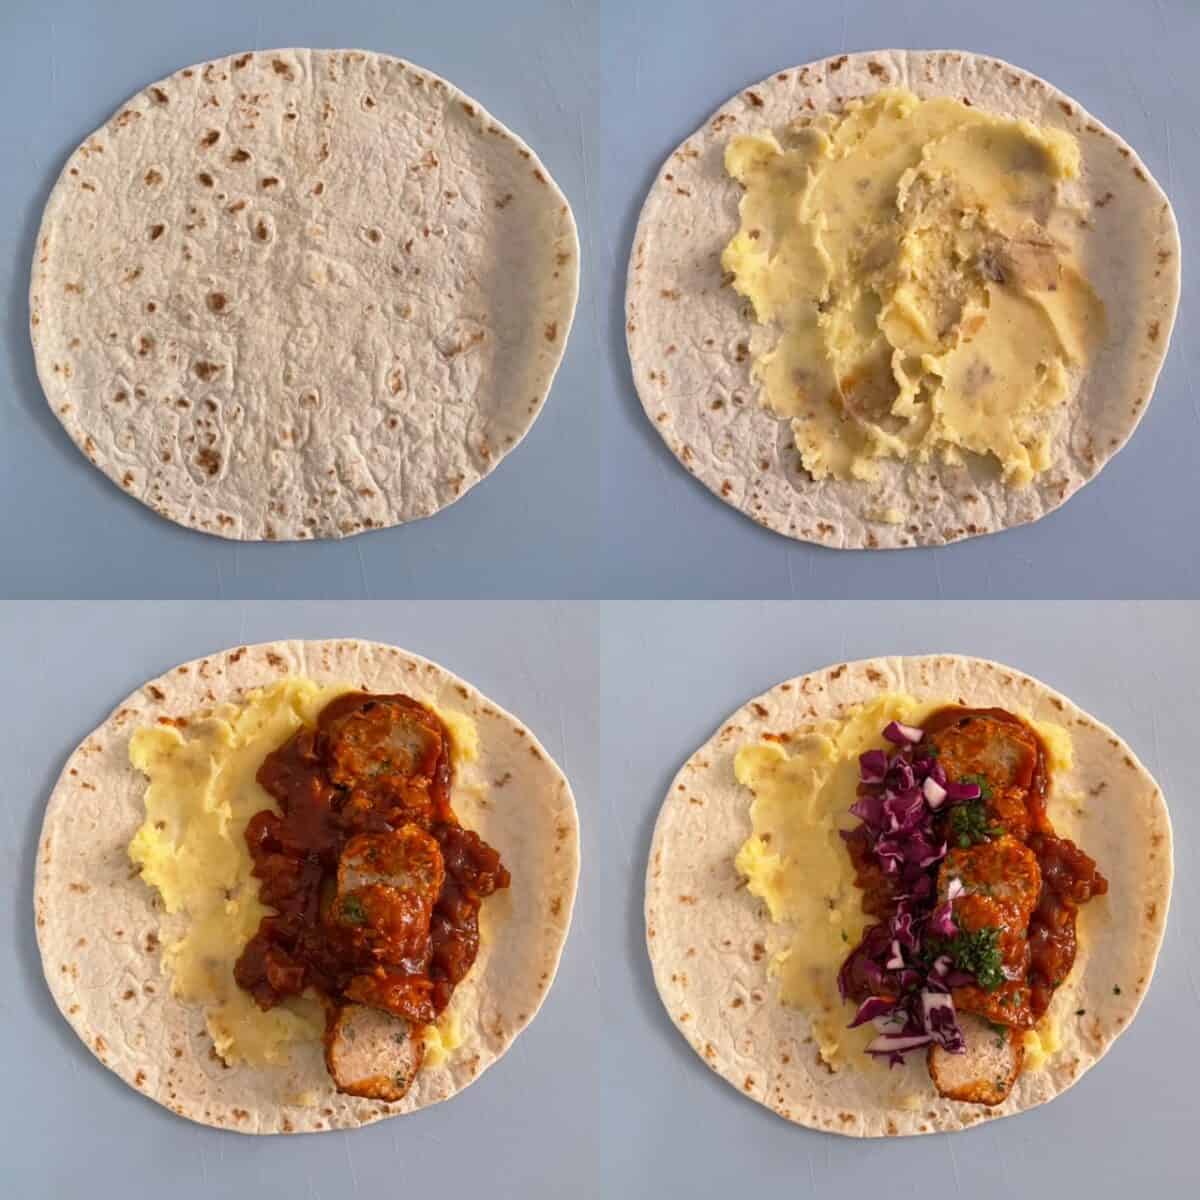 four panels showing ingredient added to the meatball wrap before wrapping.